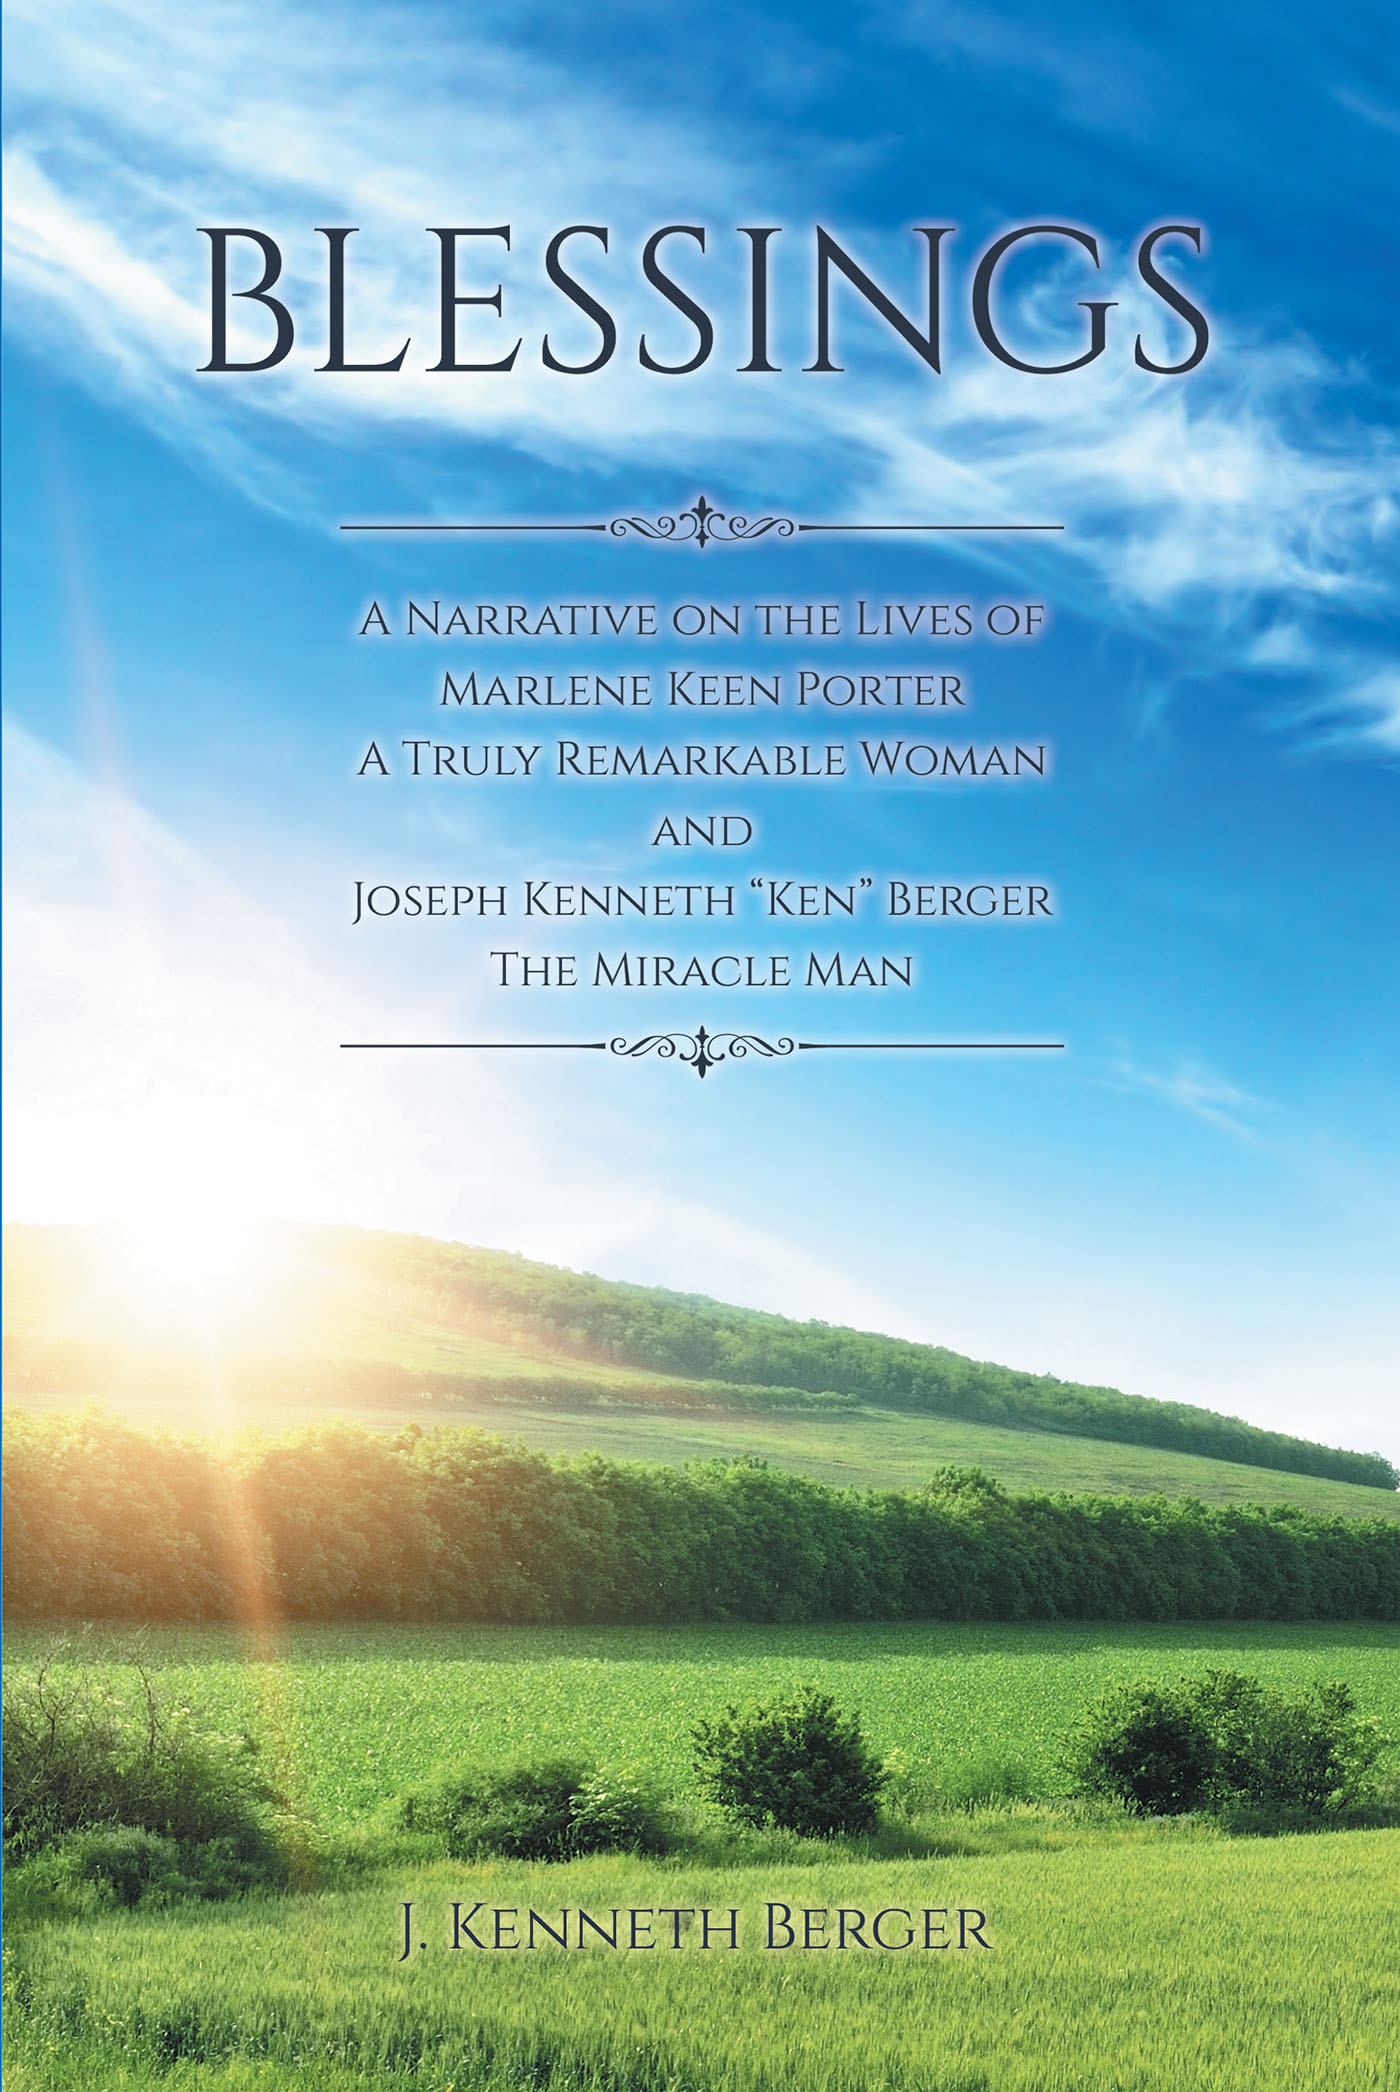 Author J. Kenneth Berger’s New Book, "Blessings," Centers Around the Lives of the Author and His Wife and Their Countless Gifts from the Lord in Return for Their Faith